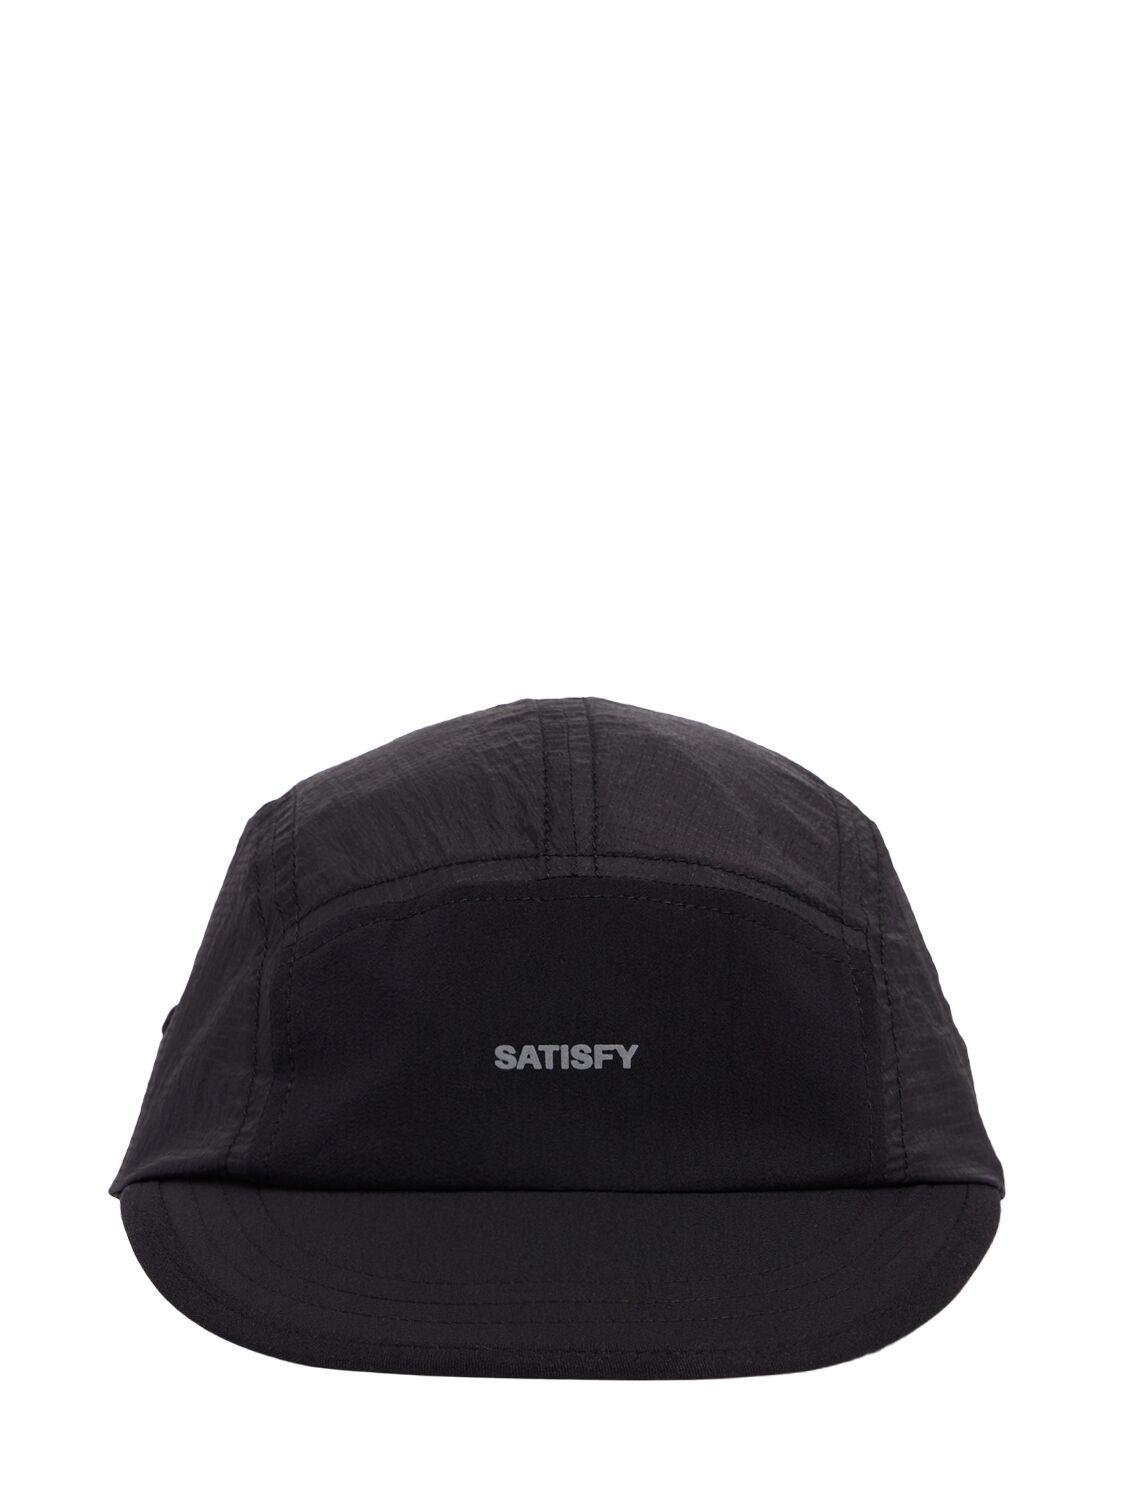 Rippy Trail Tech Cap by SATISFY